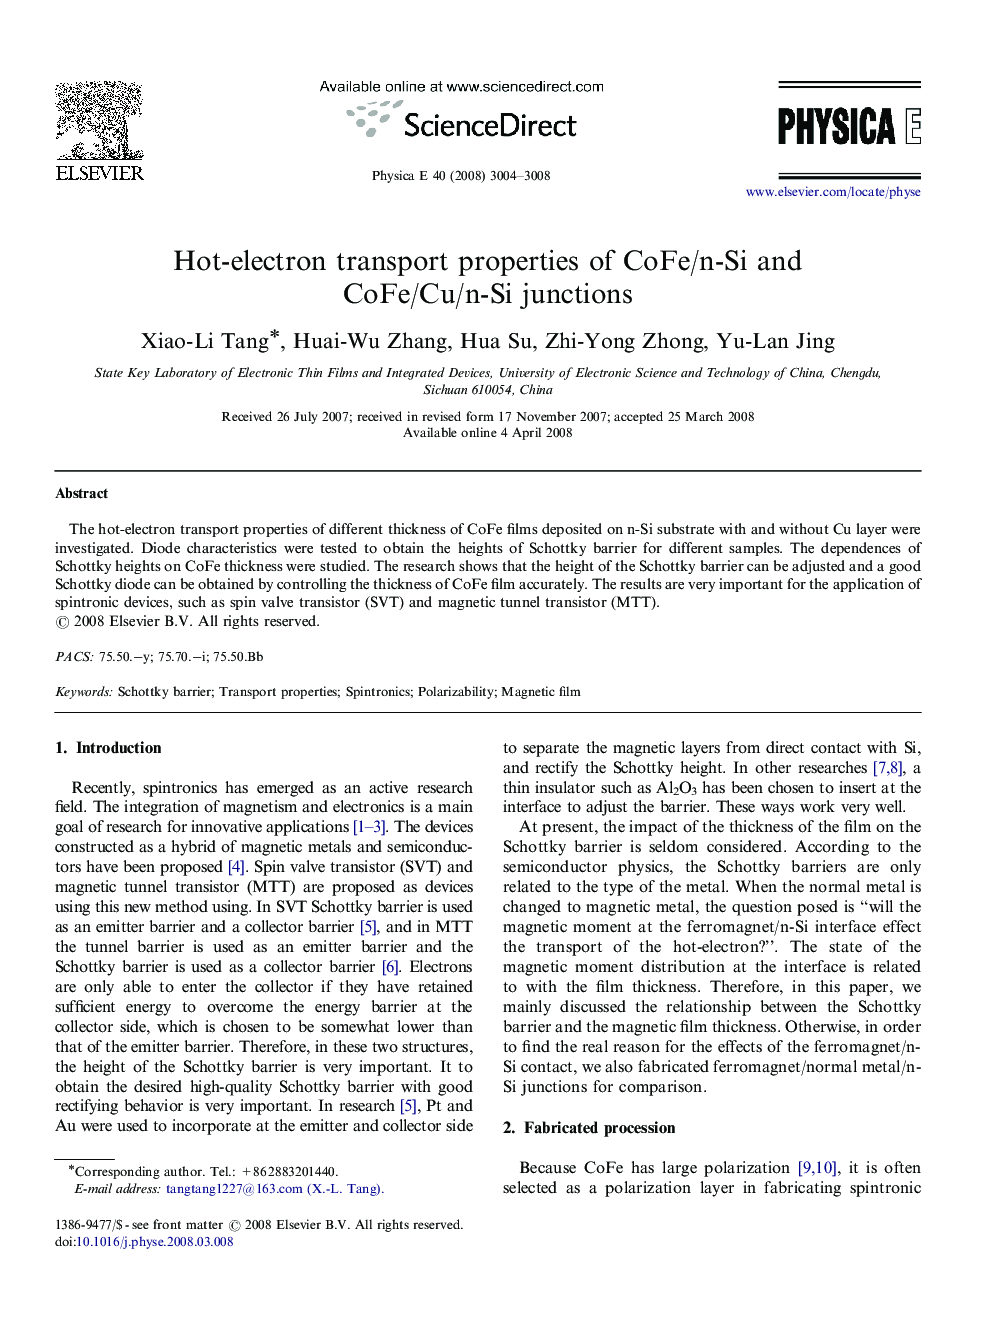 Hot-electron transport properties of CoFe/n-Si and CoFe/Cu/n-Si junctions